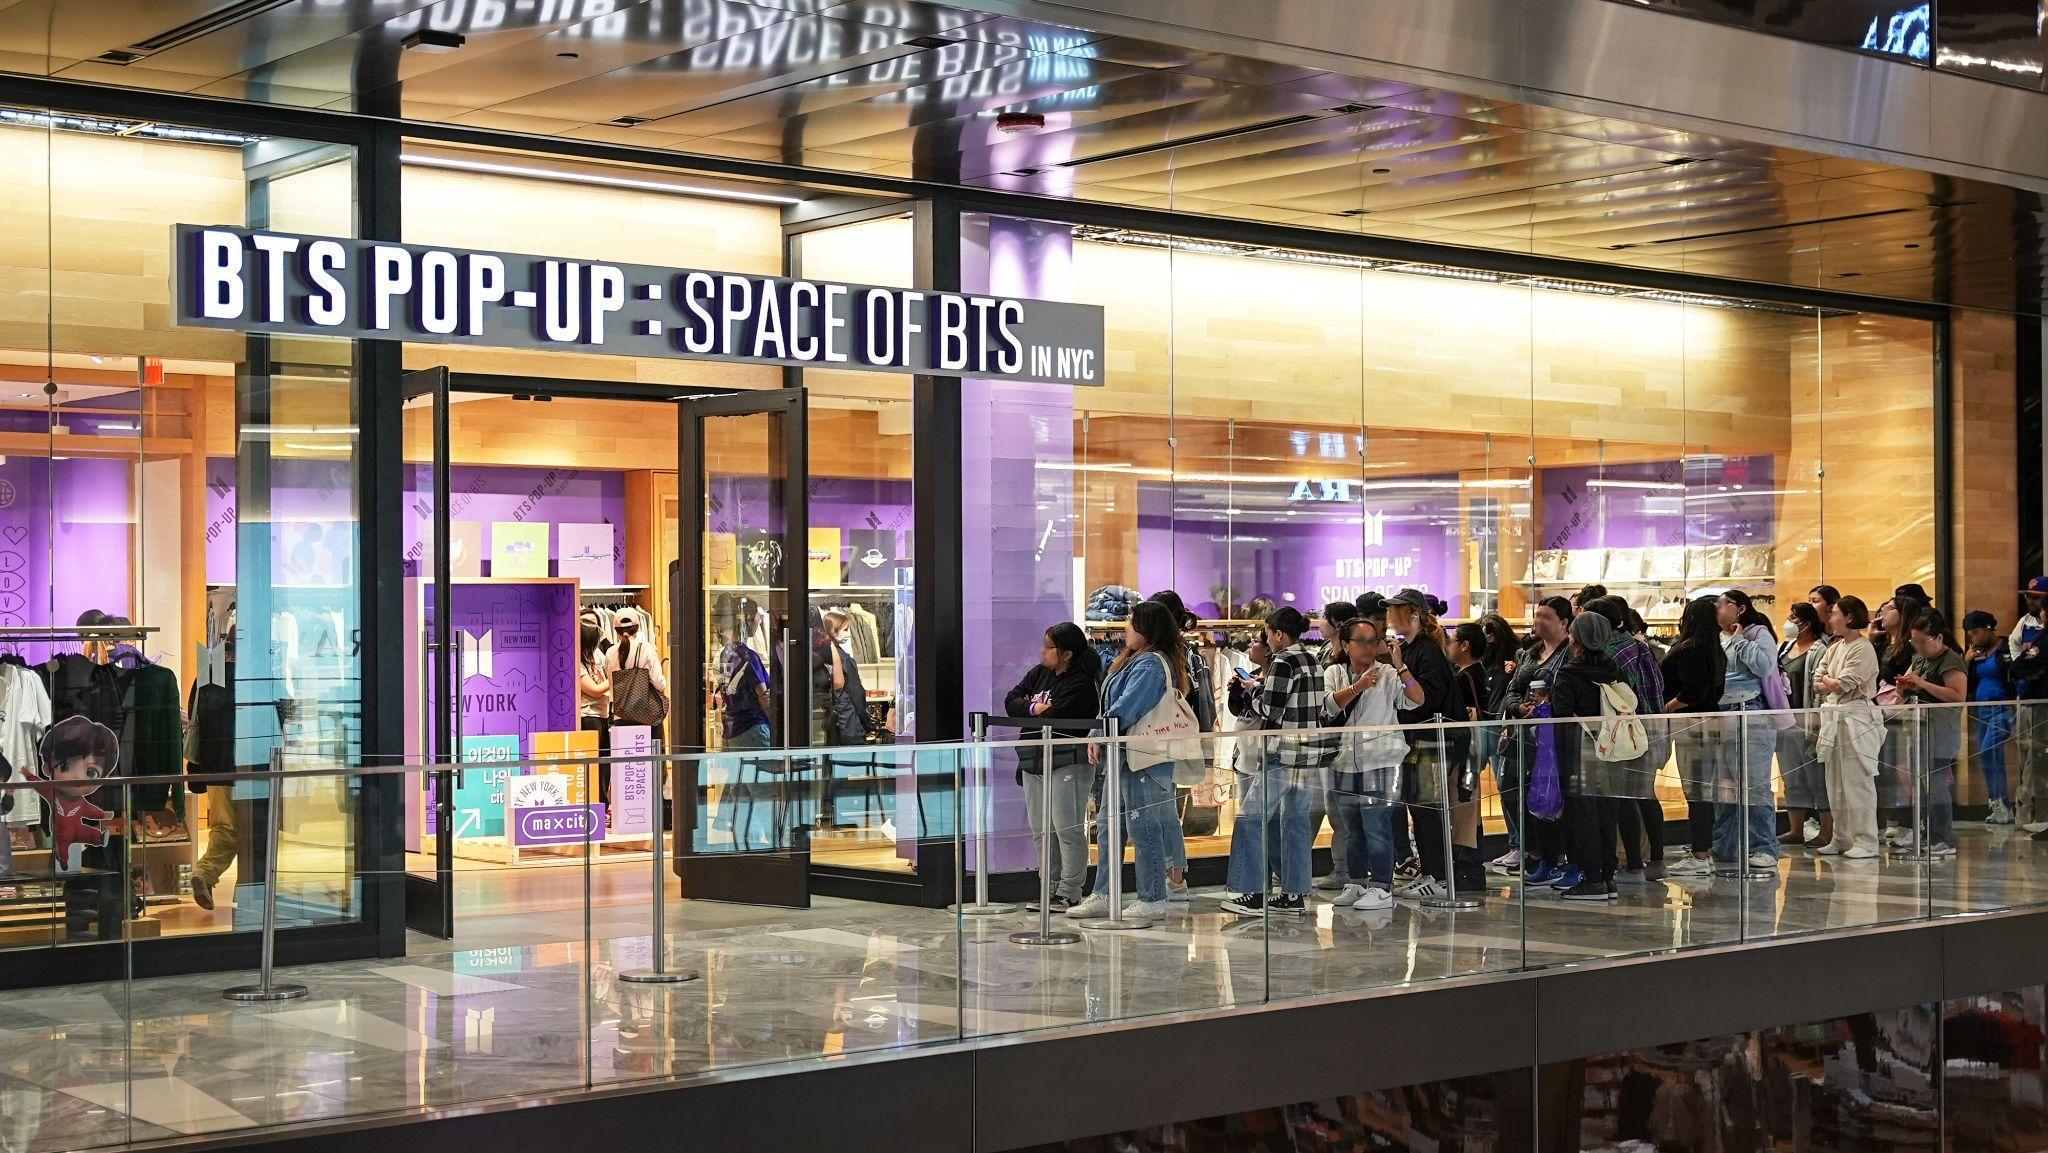 BTS POP-UP : SPACE OF BTS located in New York, United States. Fans lining up outside the store.